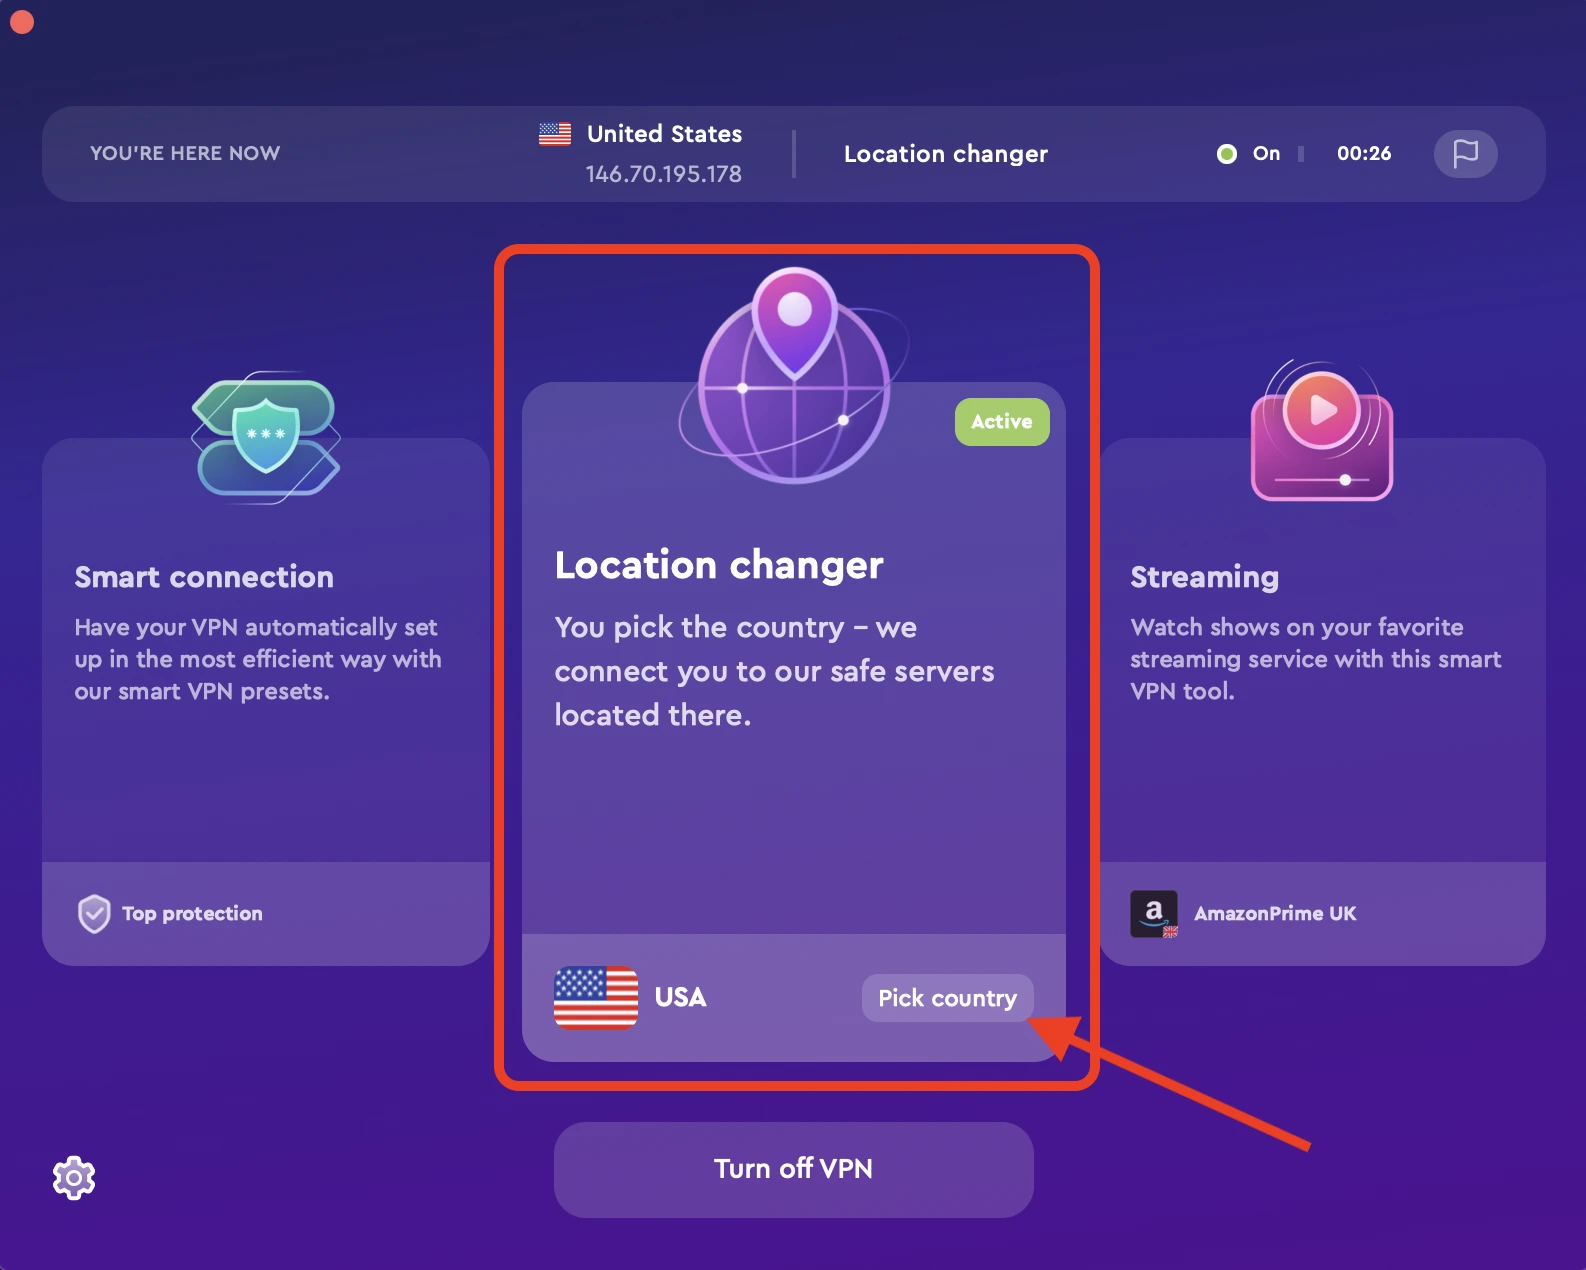 using location changer in usa